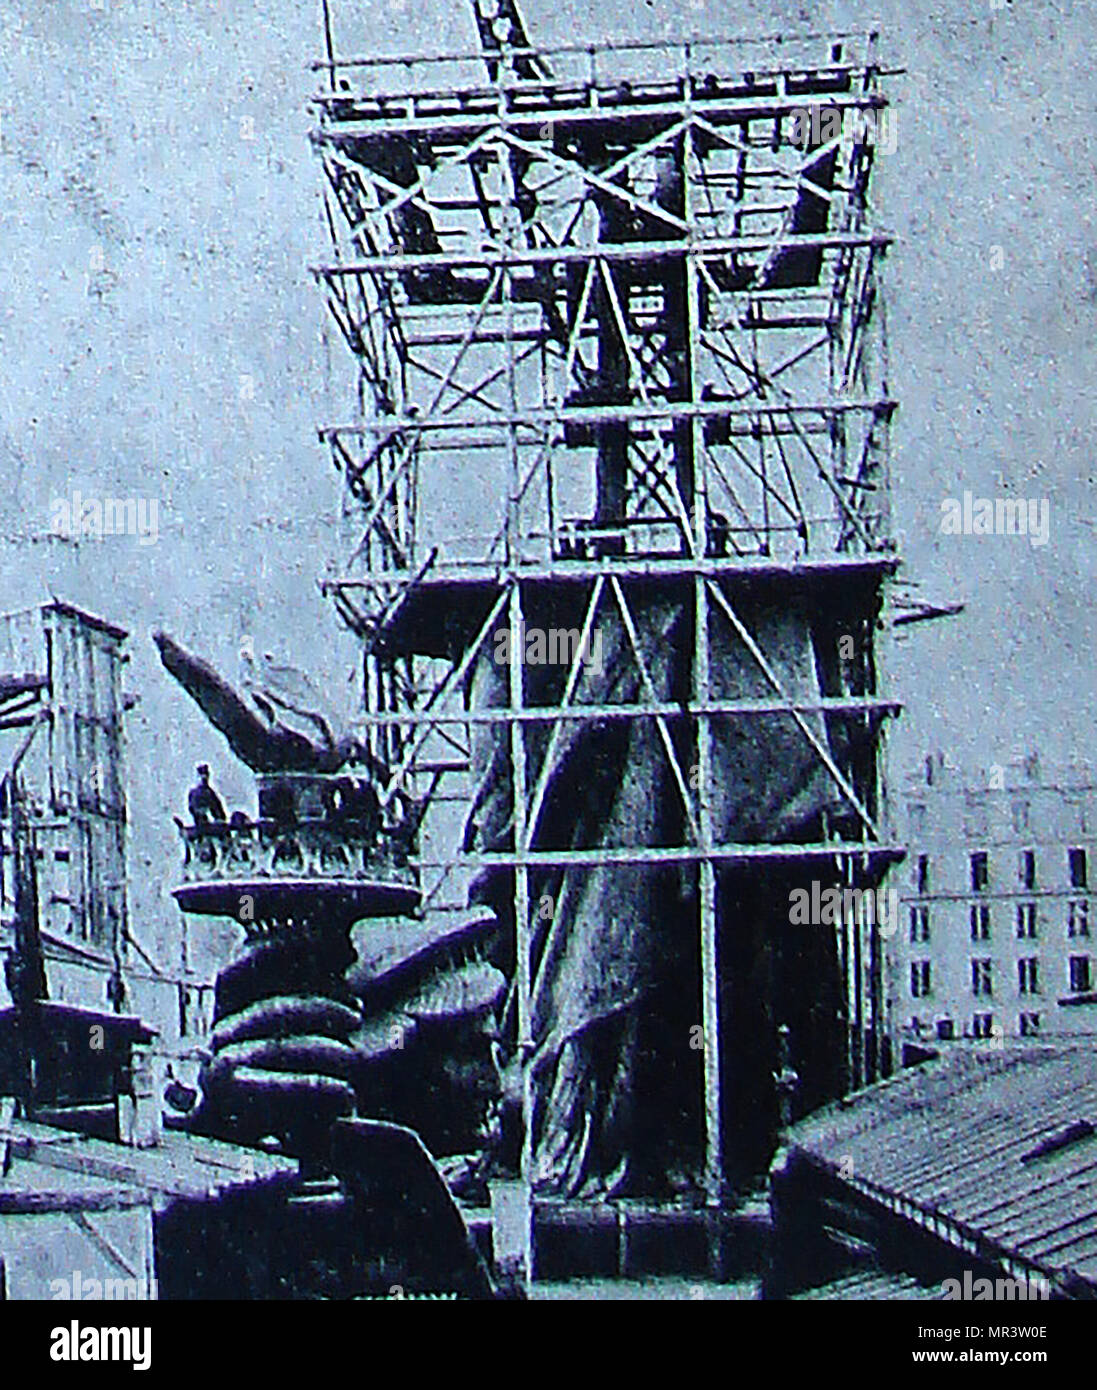 1846 Statue of Liberty being constructed in Paris , France before transportation to the USA - Sculptor Frédéric Auguste Bartholdi, Builder Gustave Eiffel Stock Photo